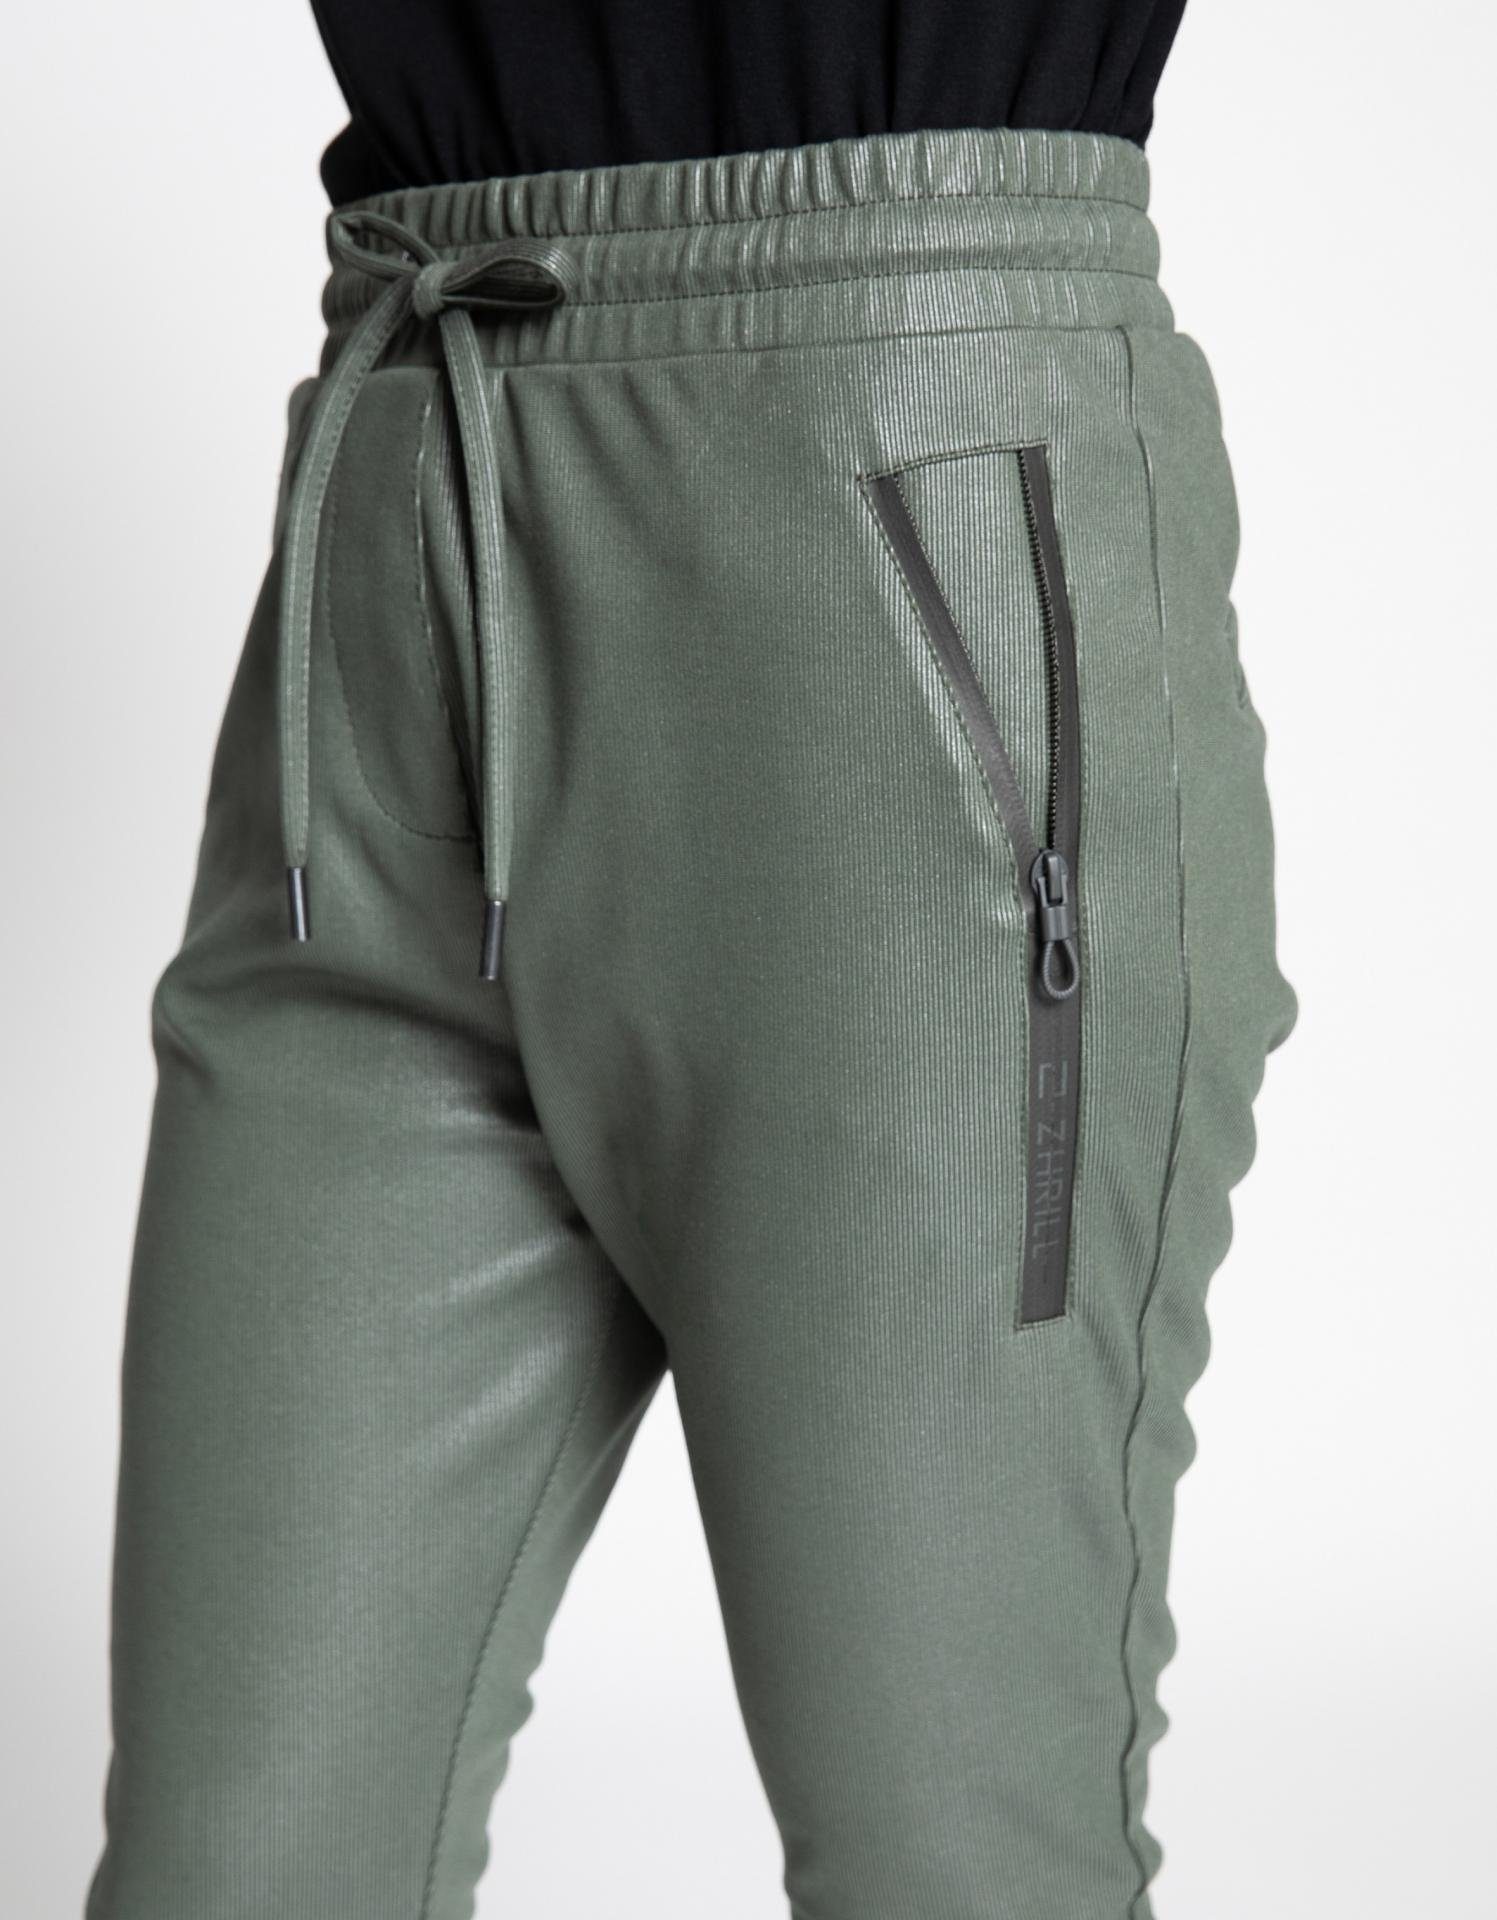 Pants Fabia olive Zhrill Jogger